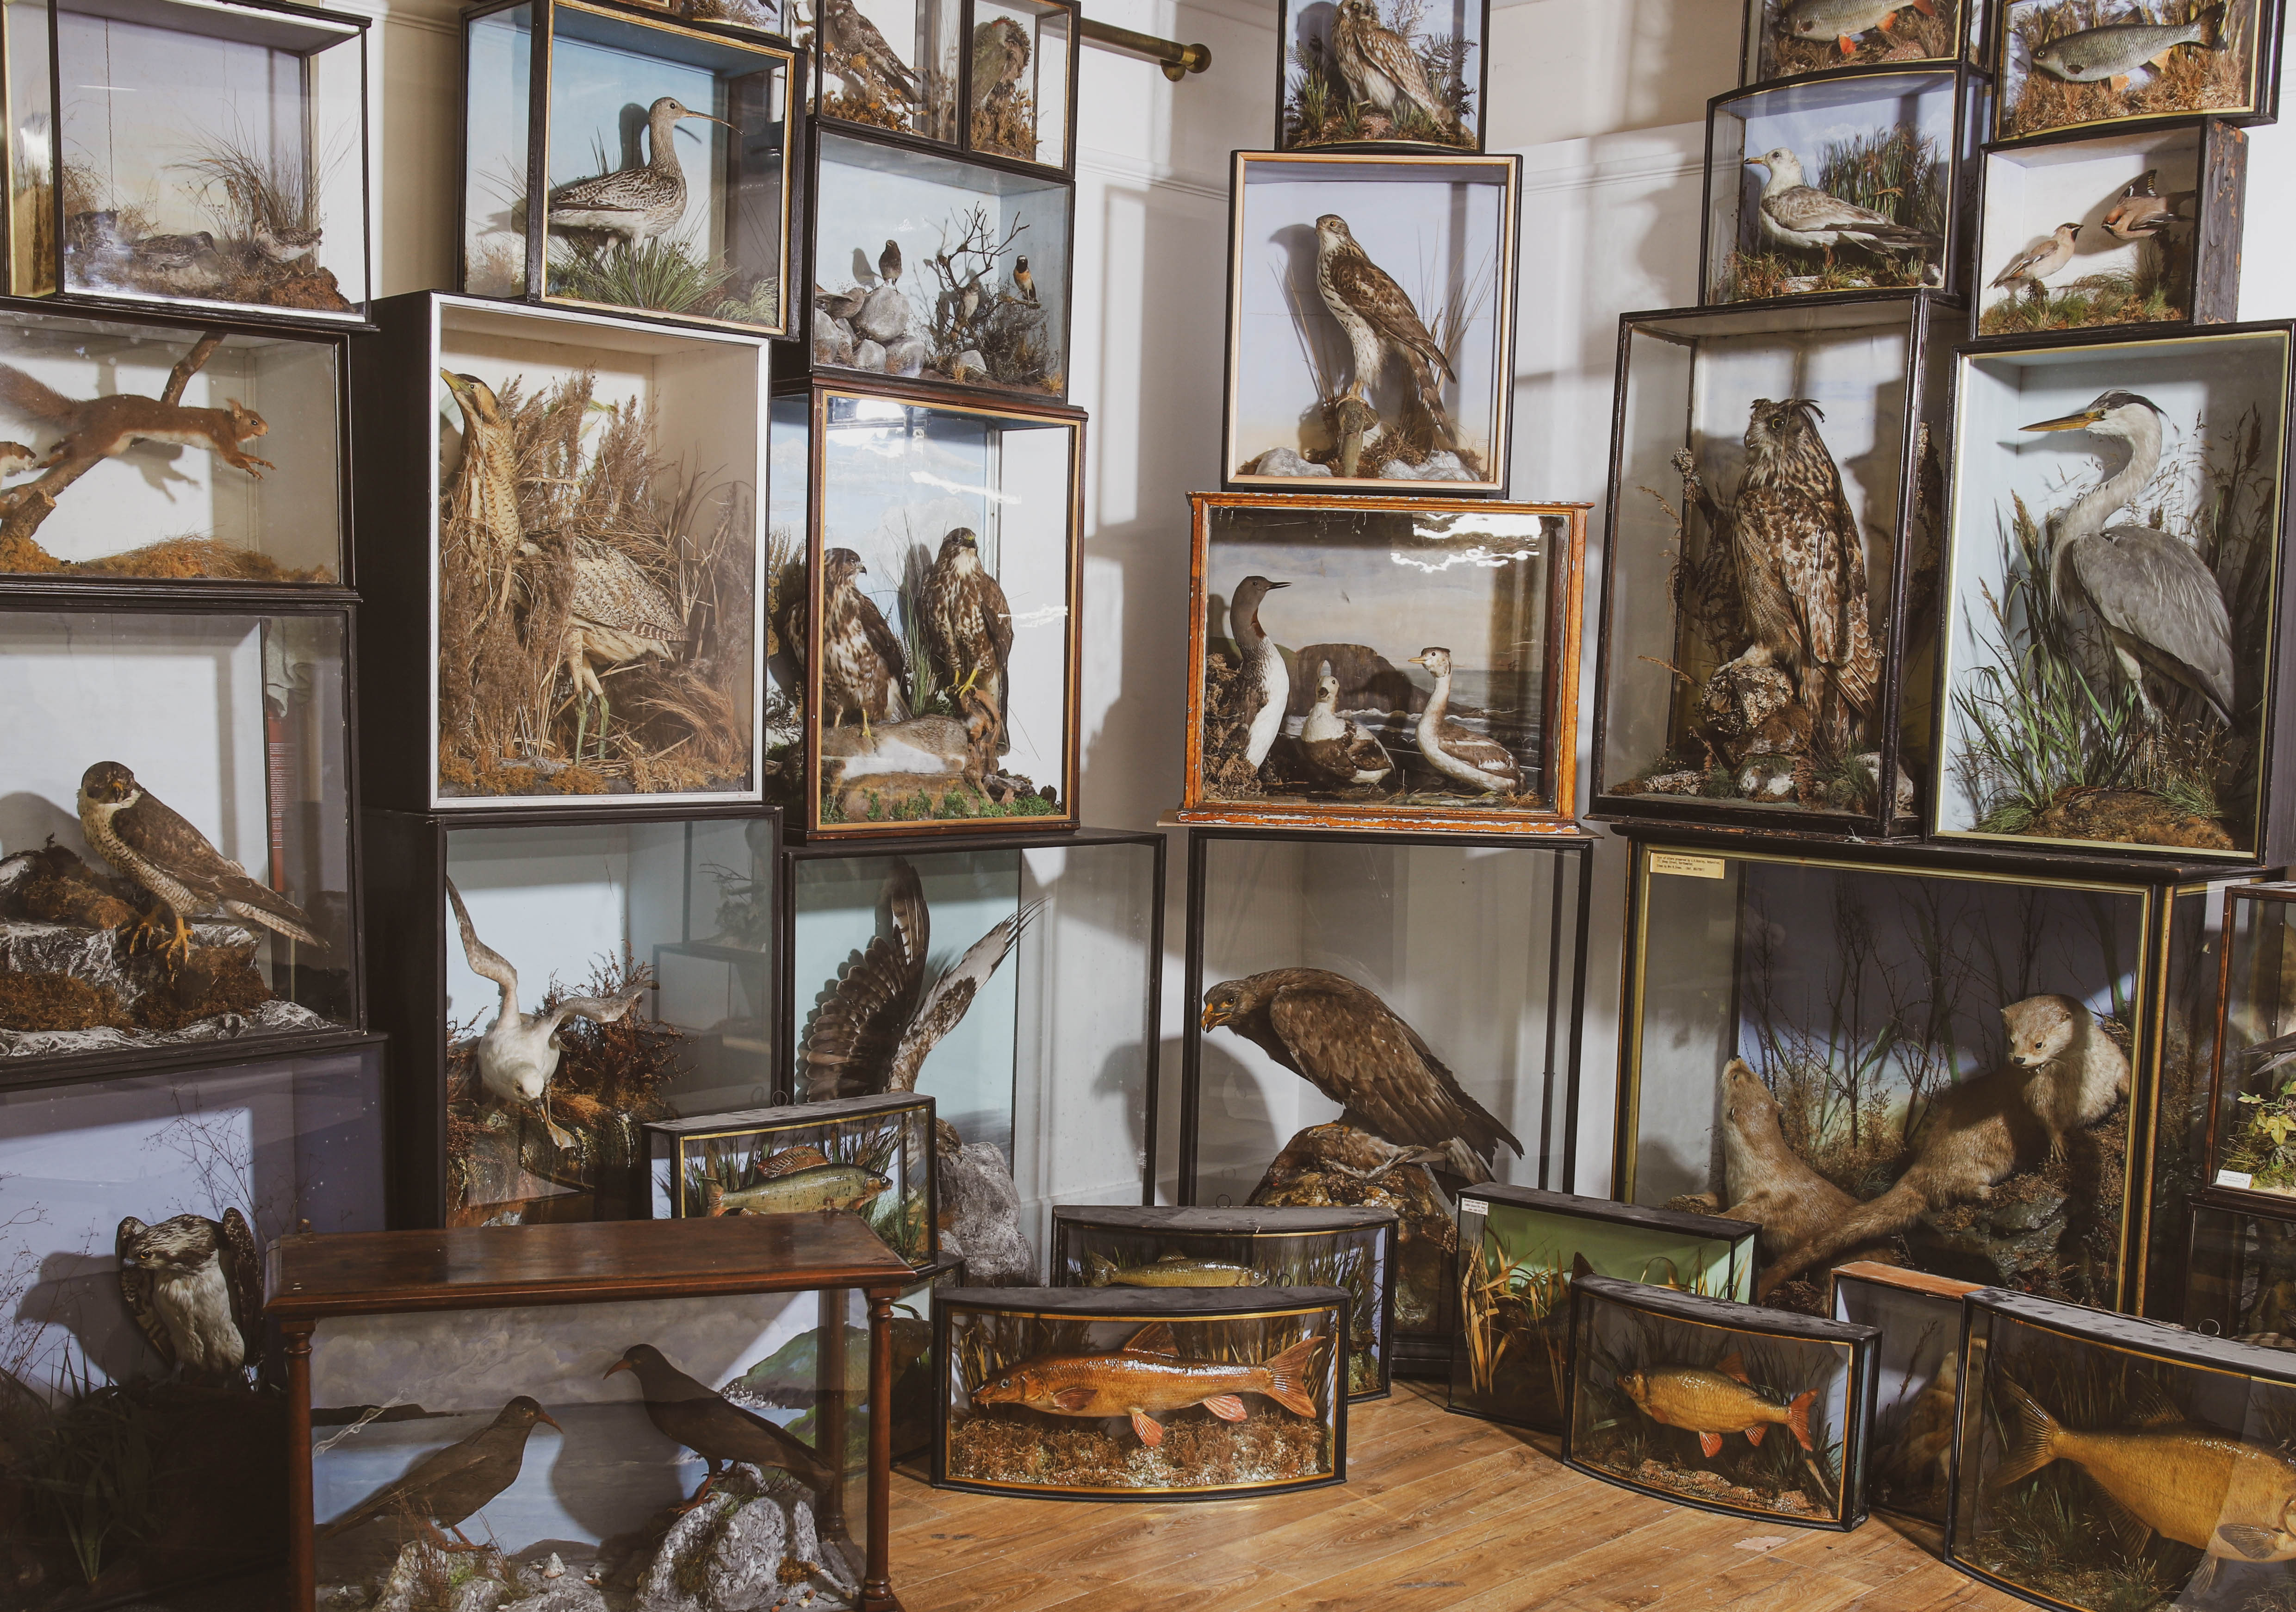 A Private Collection of Taxidermy